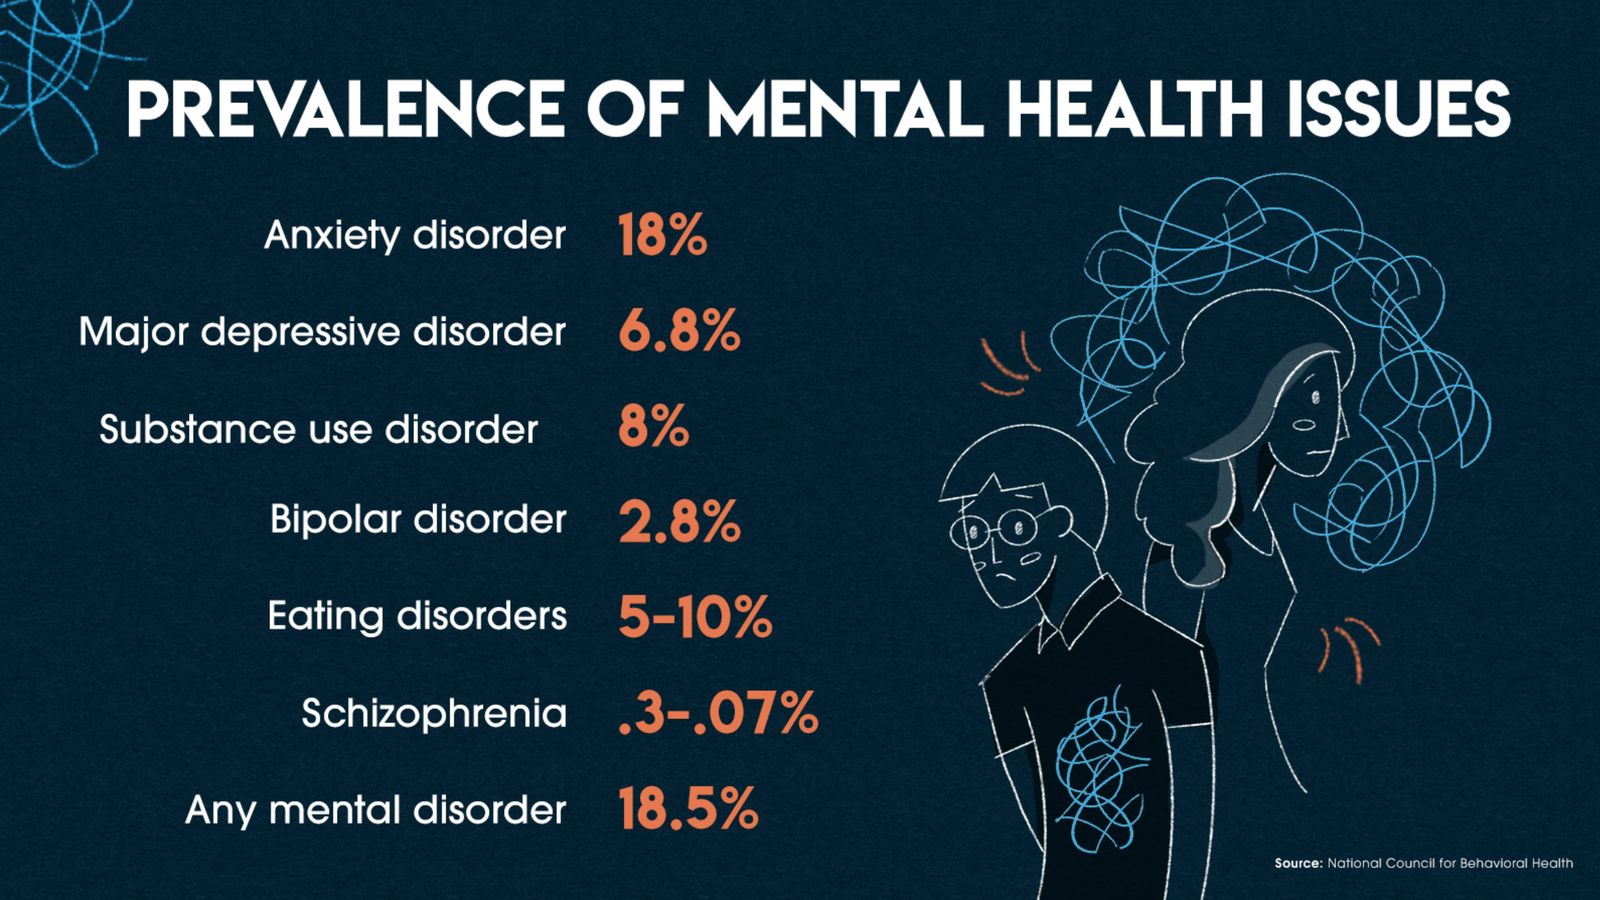 Why is Mental Health an Issue?